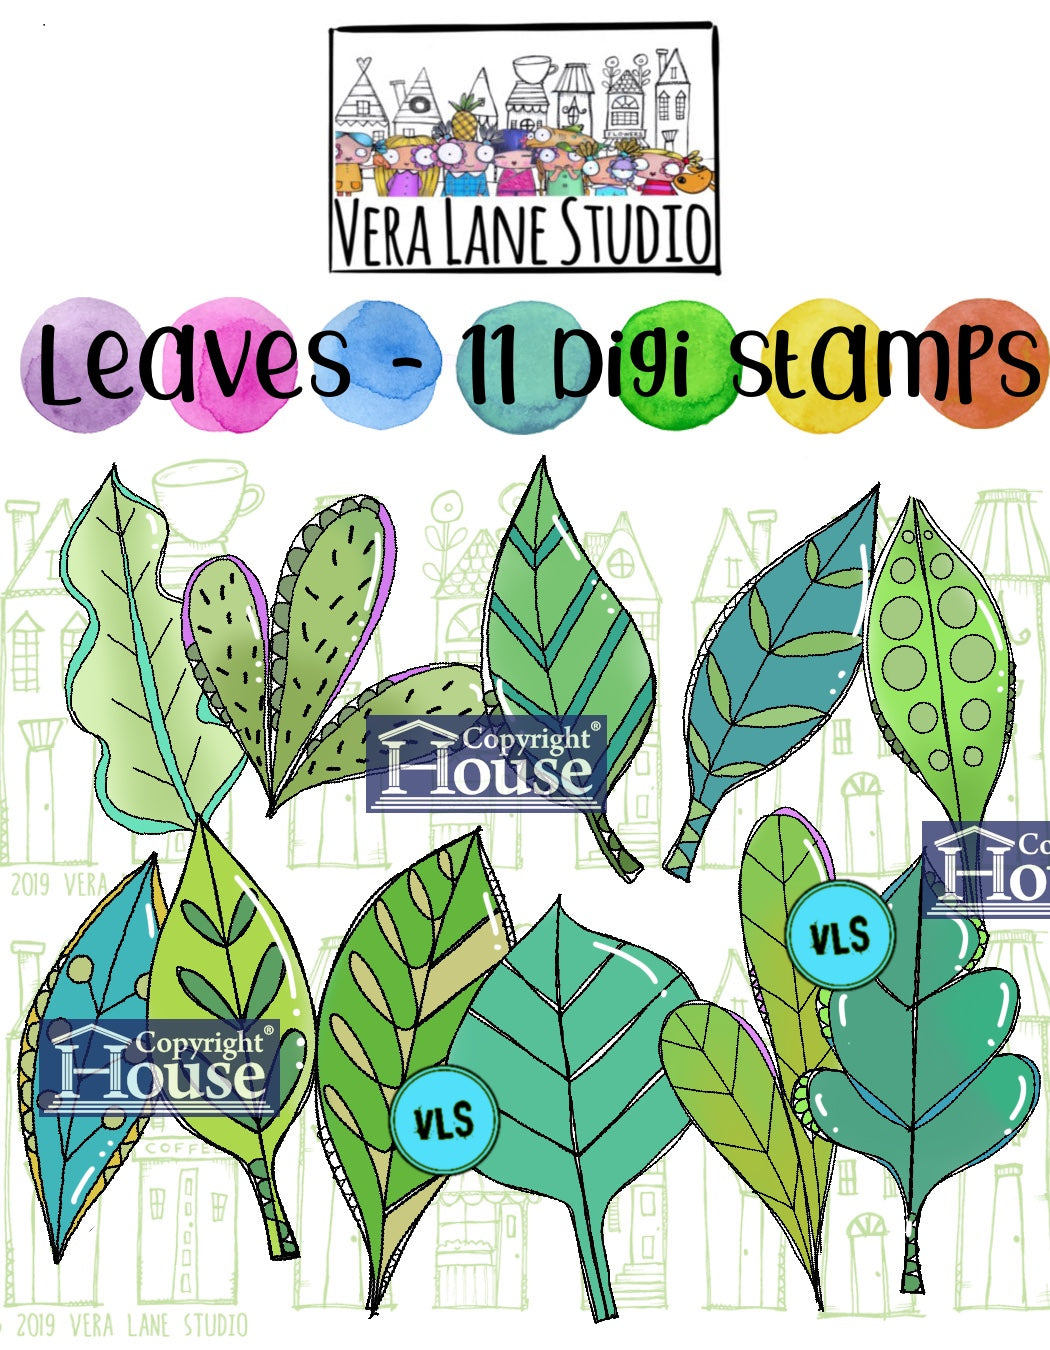 Leaves - 11 Digi stamps in jpg and png files